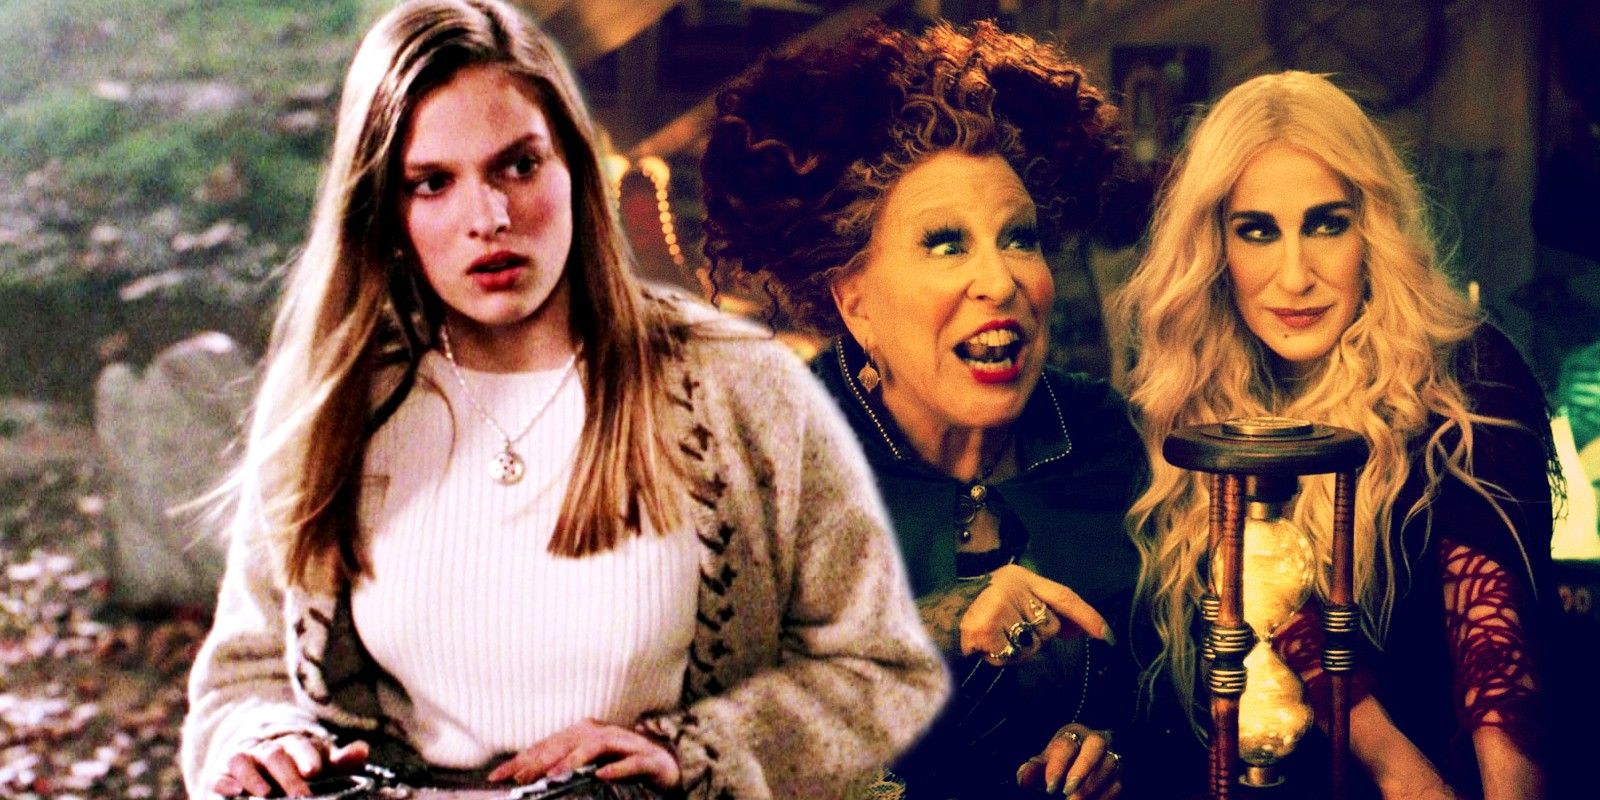 Custom image of Allison holding the book and the Sanderson sisters talking in Hocus Pocus